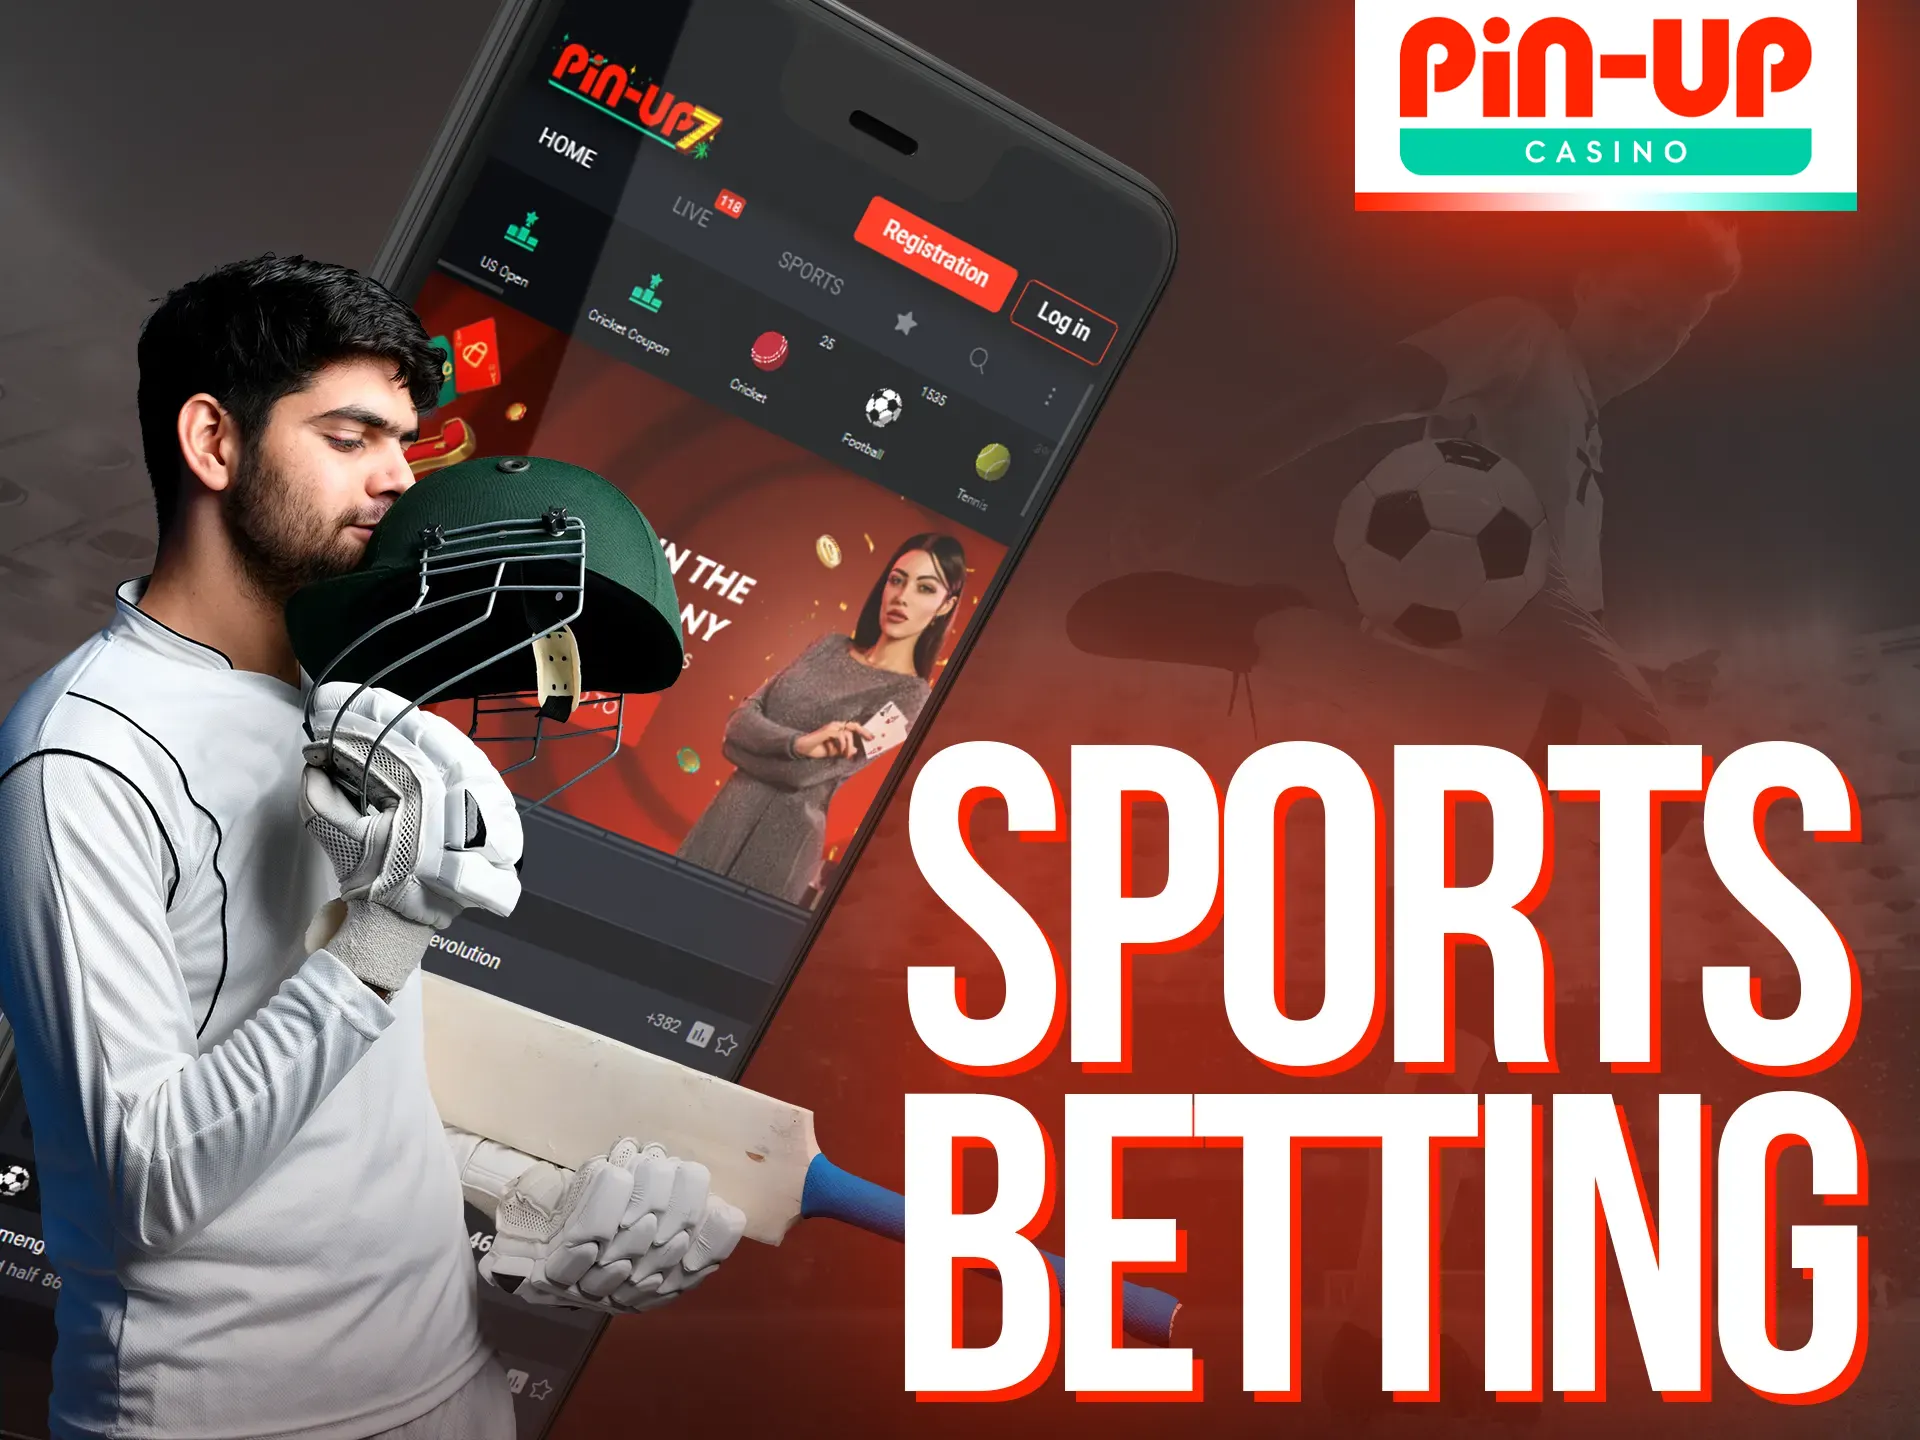 Bet on sports on the Pin-Up mobile app.